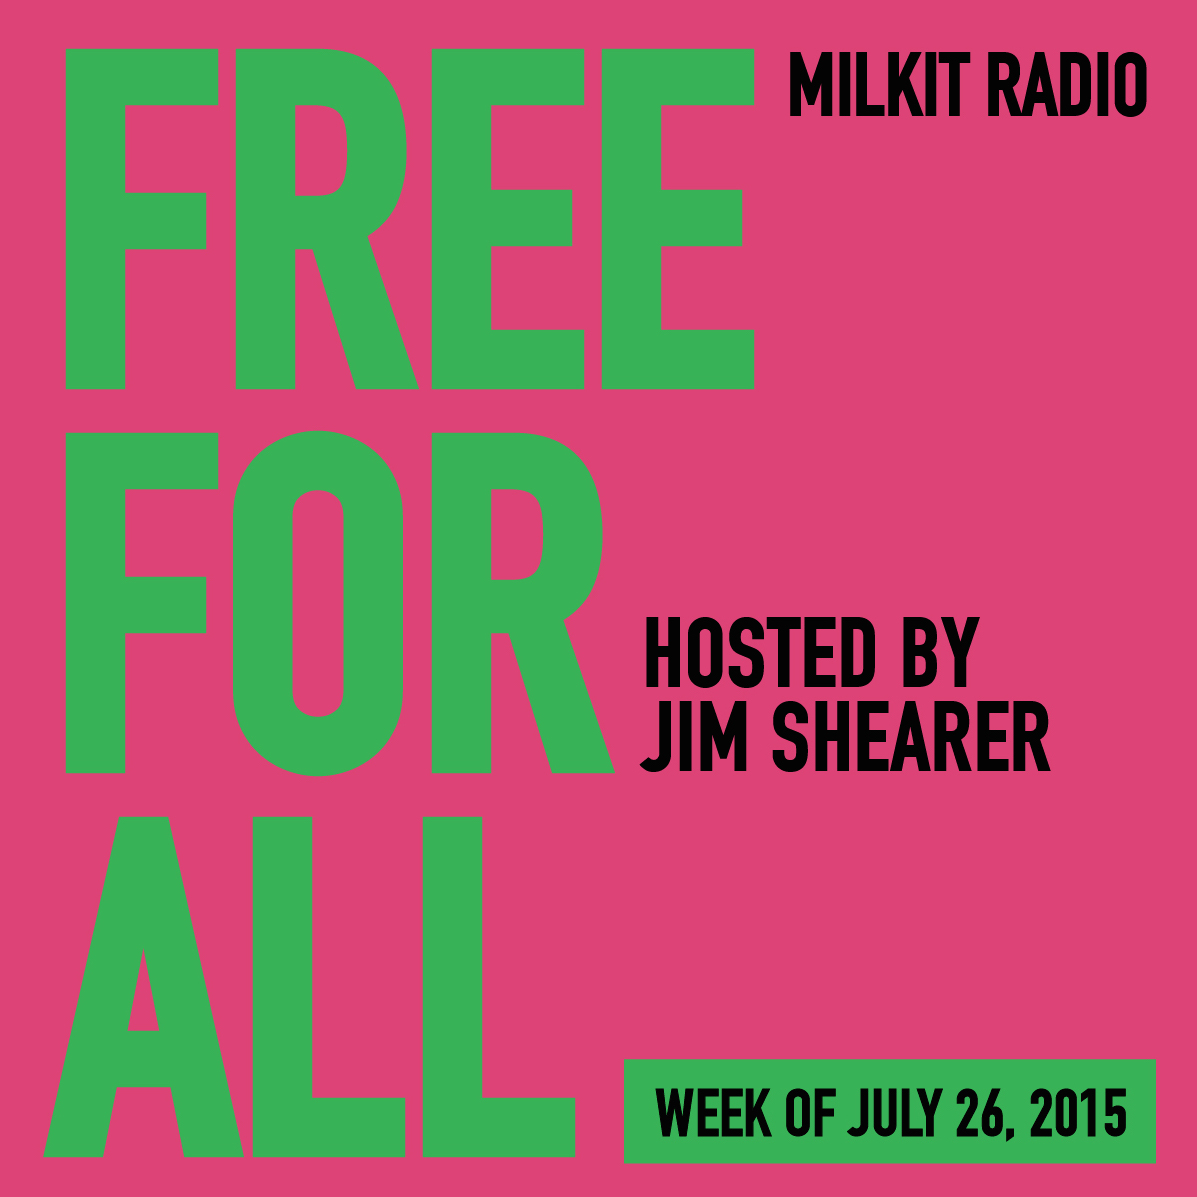 FREE FOR ALL (Milkit Radio) July 26, 2015